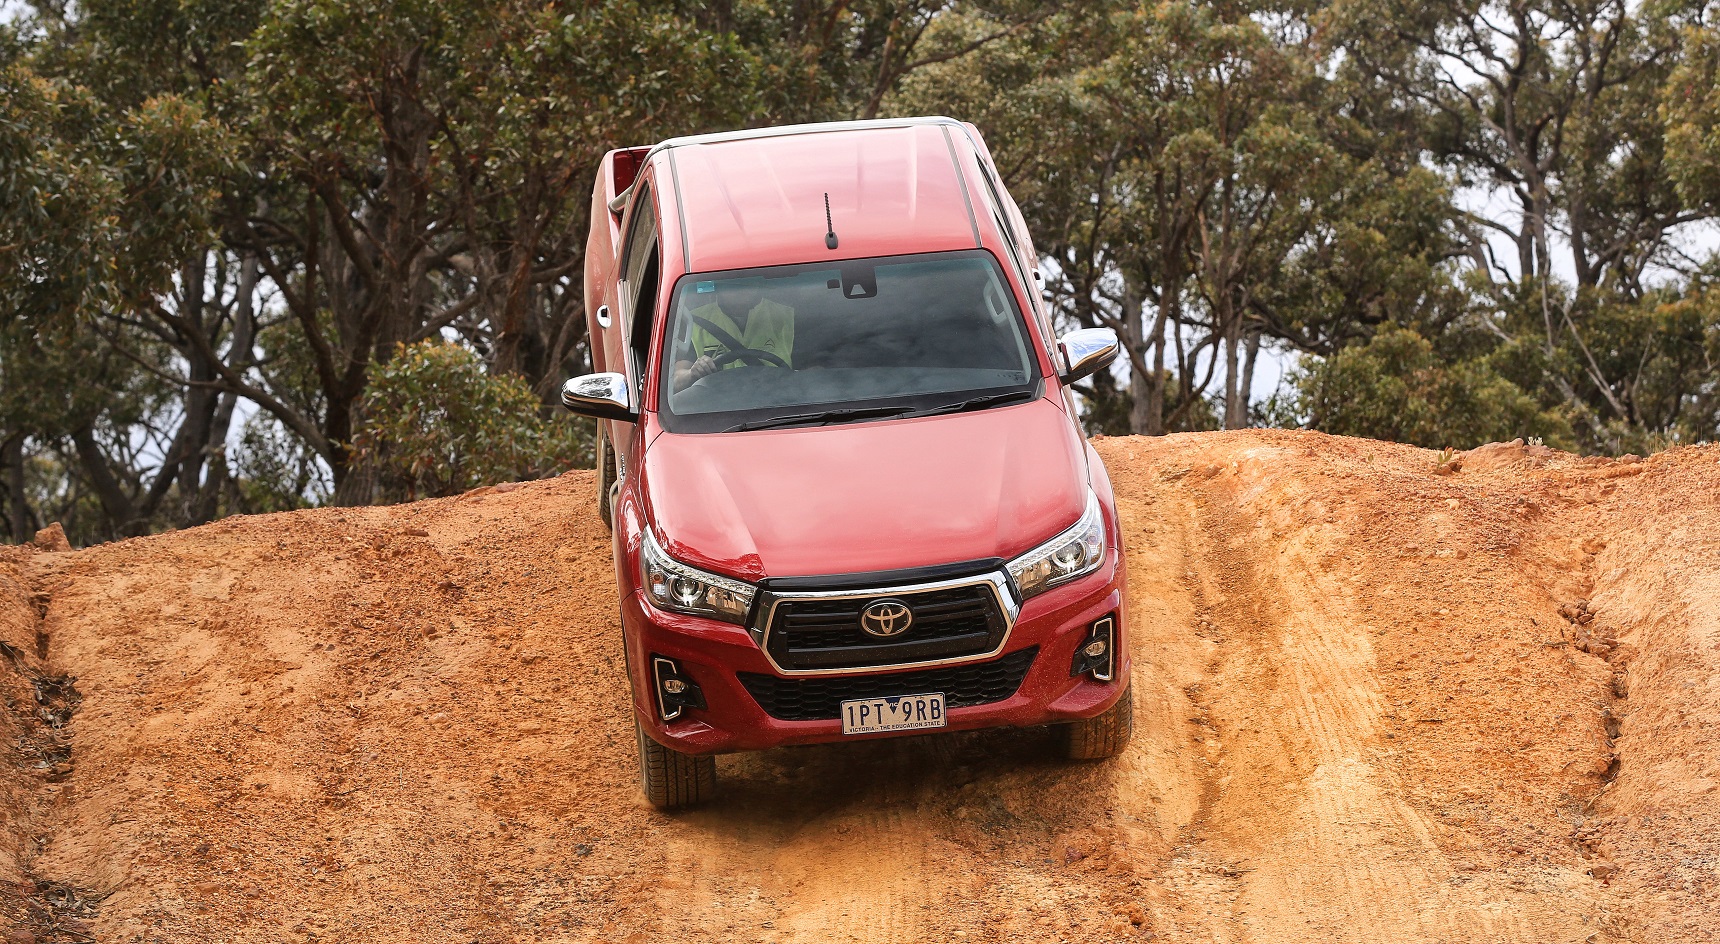 The HiLux conquered our off-road test loop with ease.